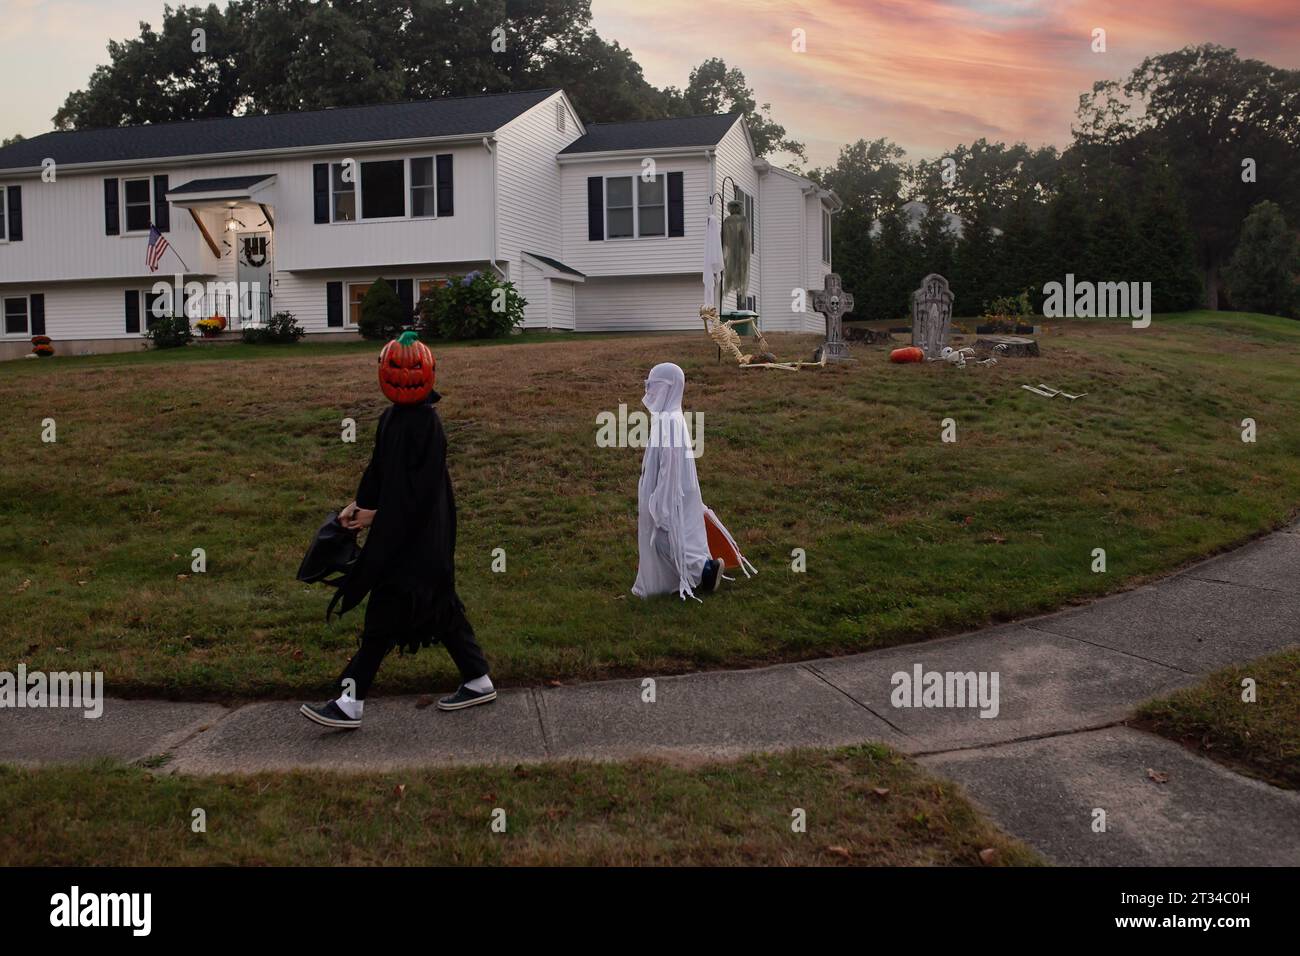 Kids dressed up in costumes for Halloween walking in a neighborhood Stock Photo